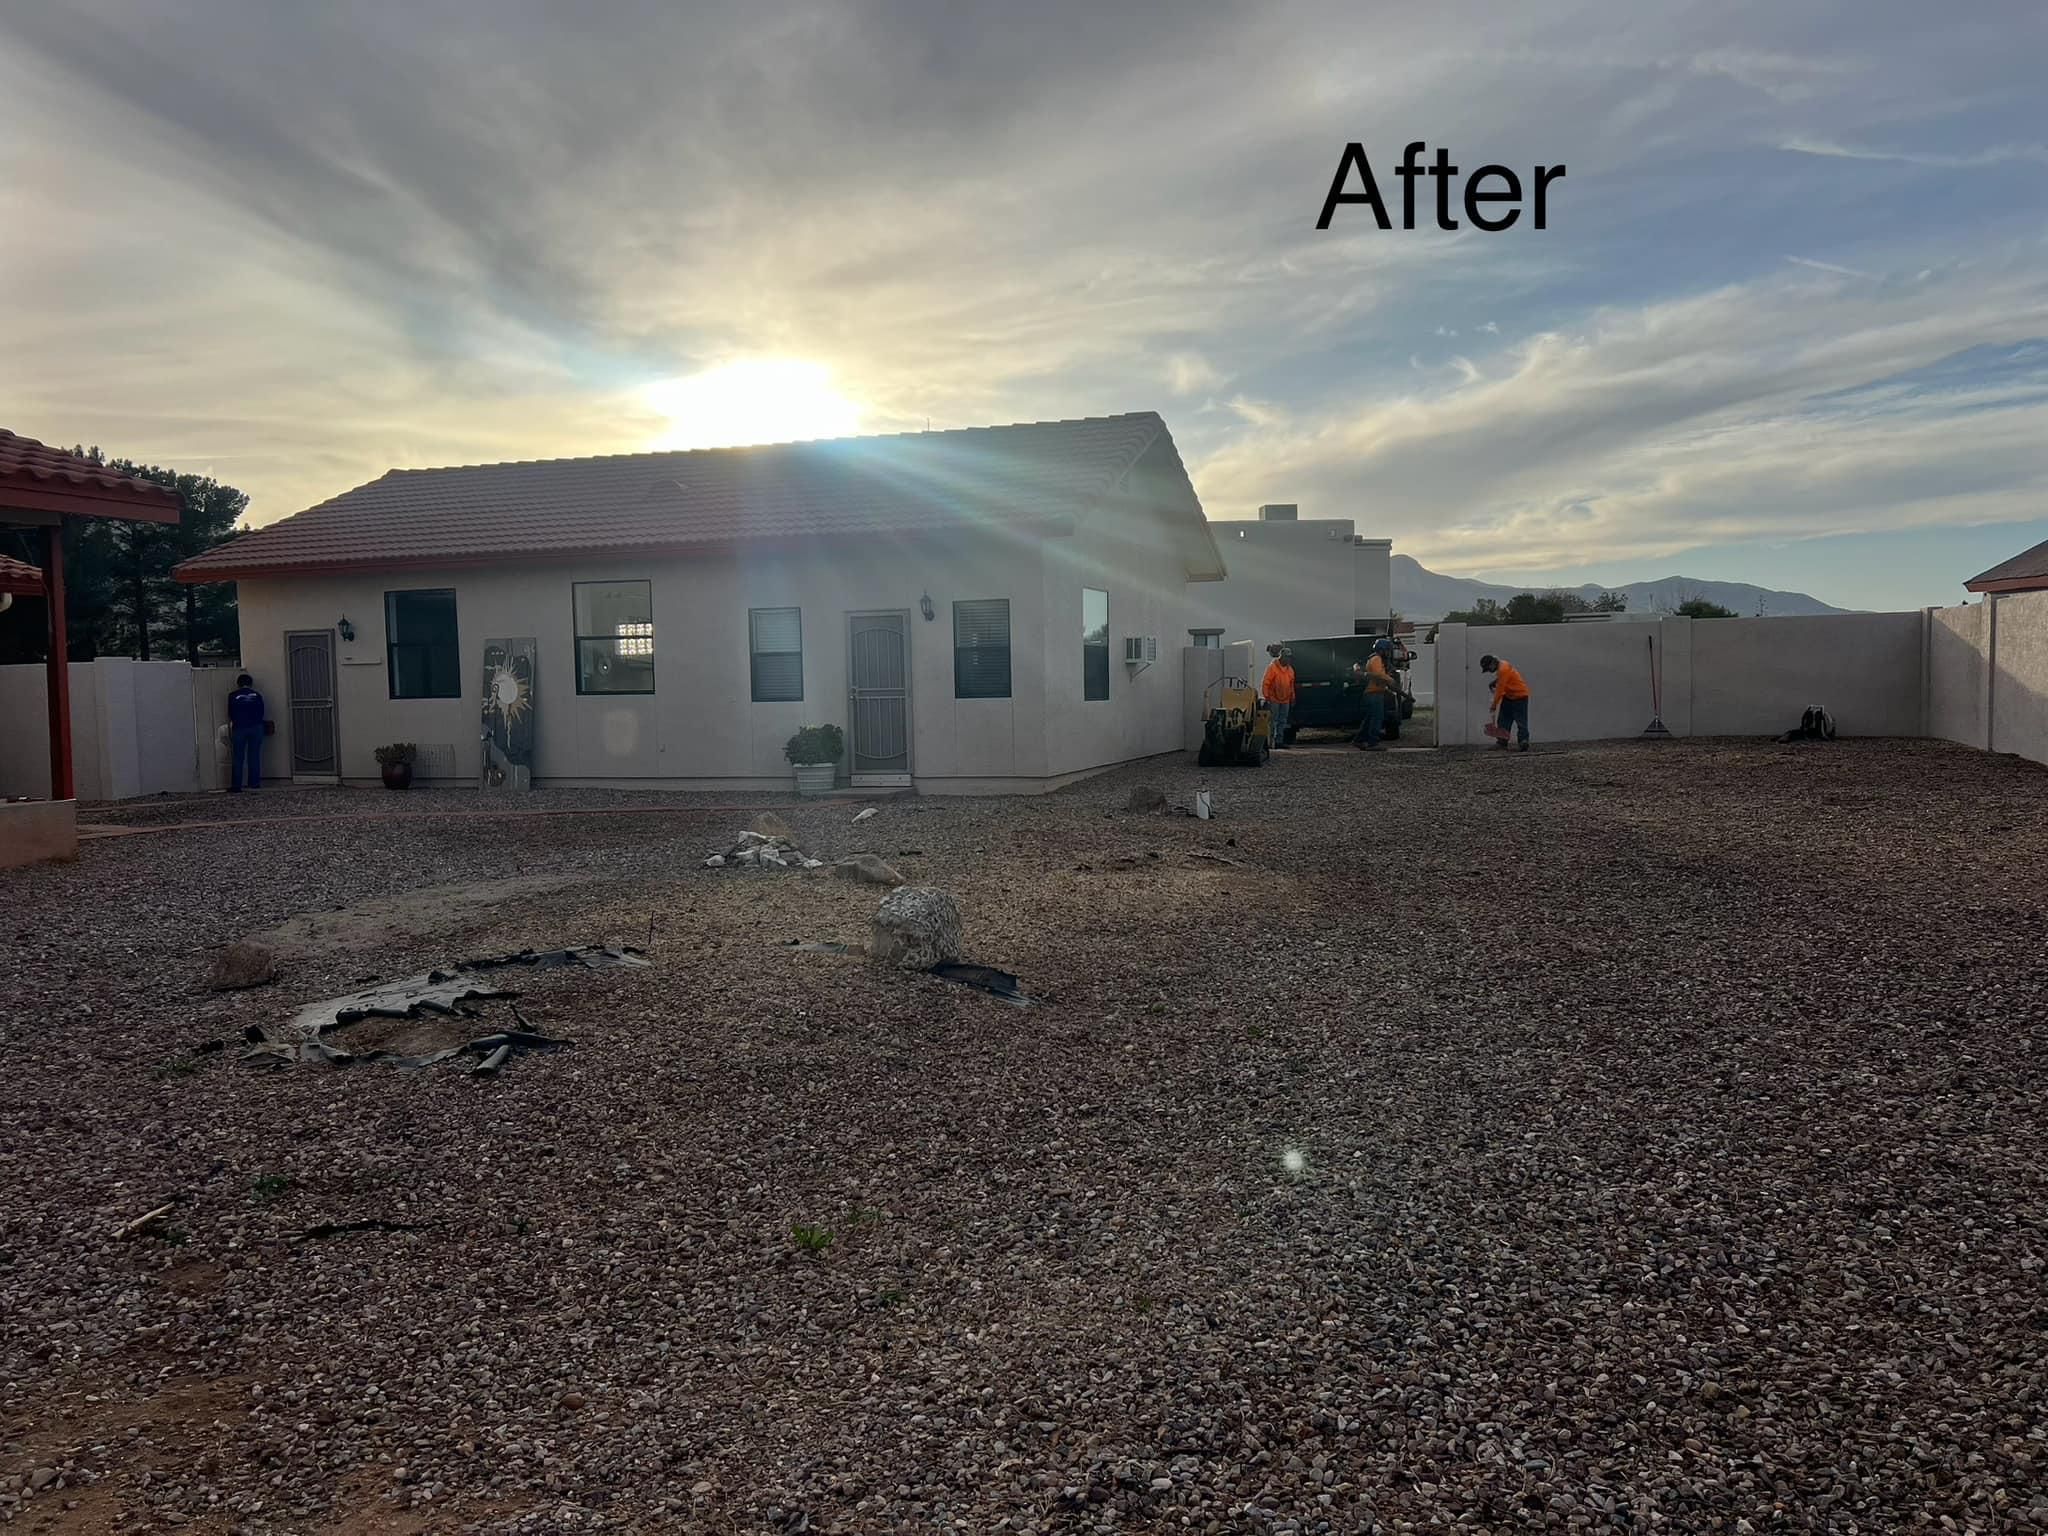 Stump Removal for By Faith Landscaping in Sierra Vista, AZ